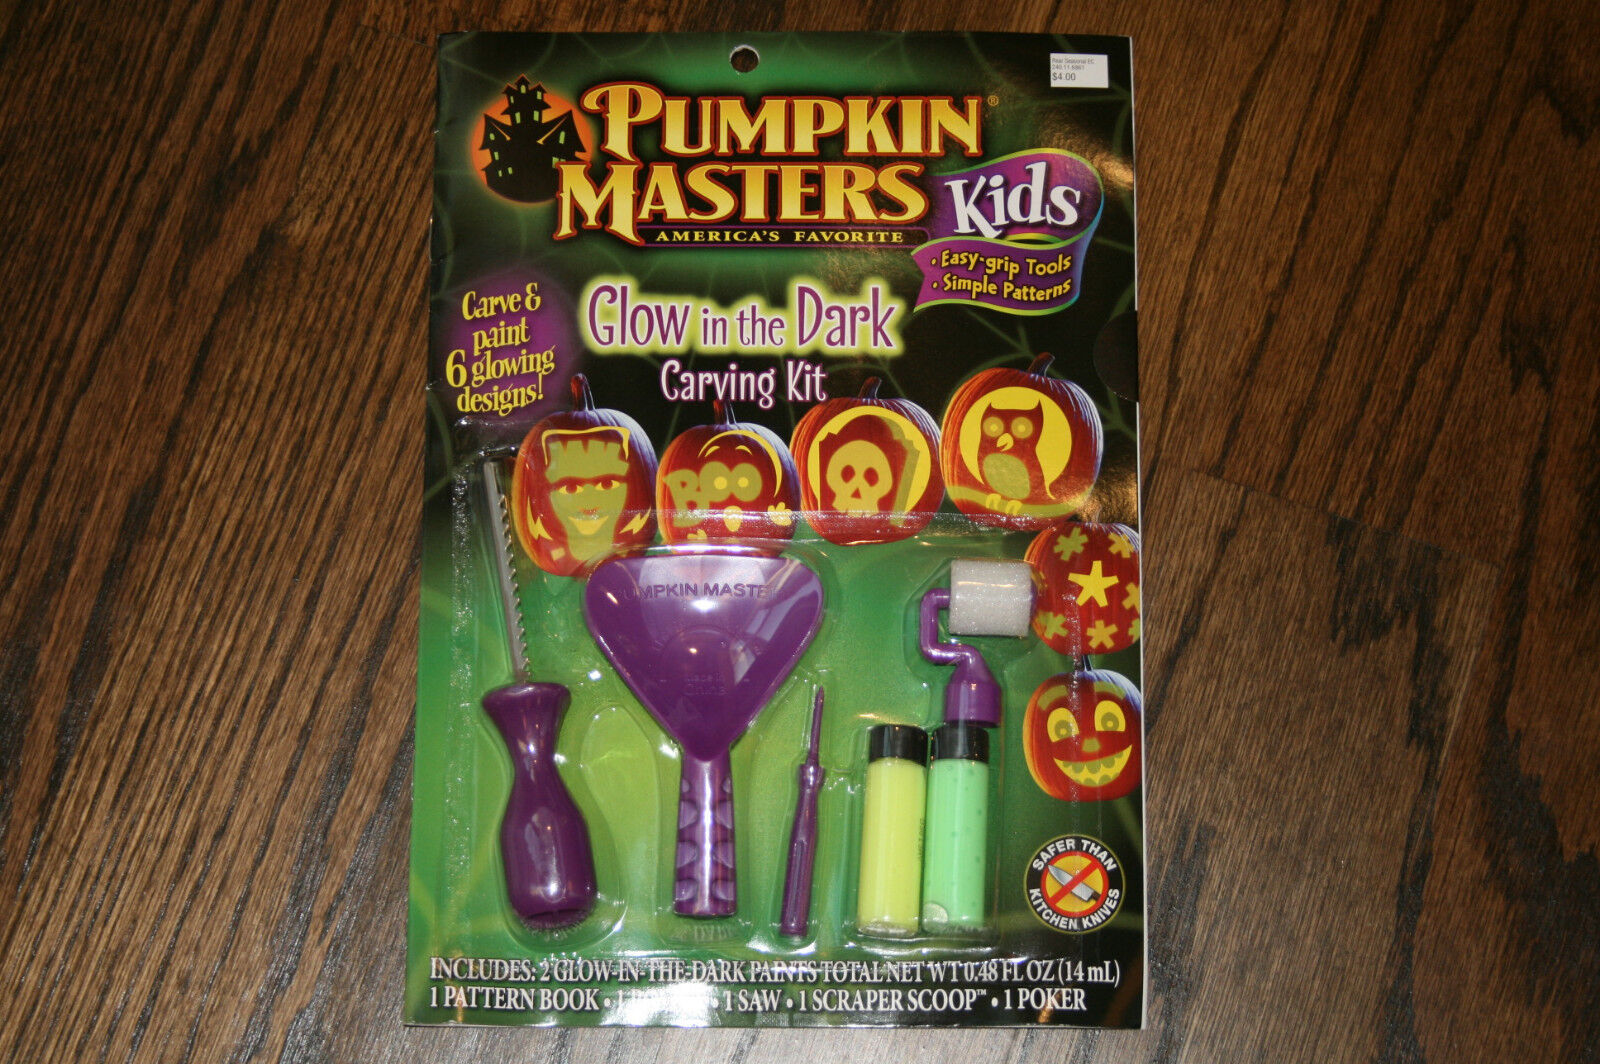 New Pumpkin Masters Kids Glow in the Dark Carving Kit for Pumpkins Carve& Paint